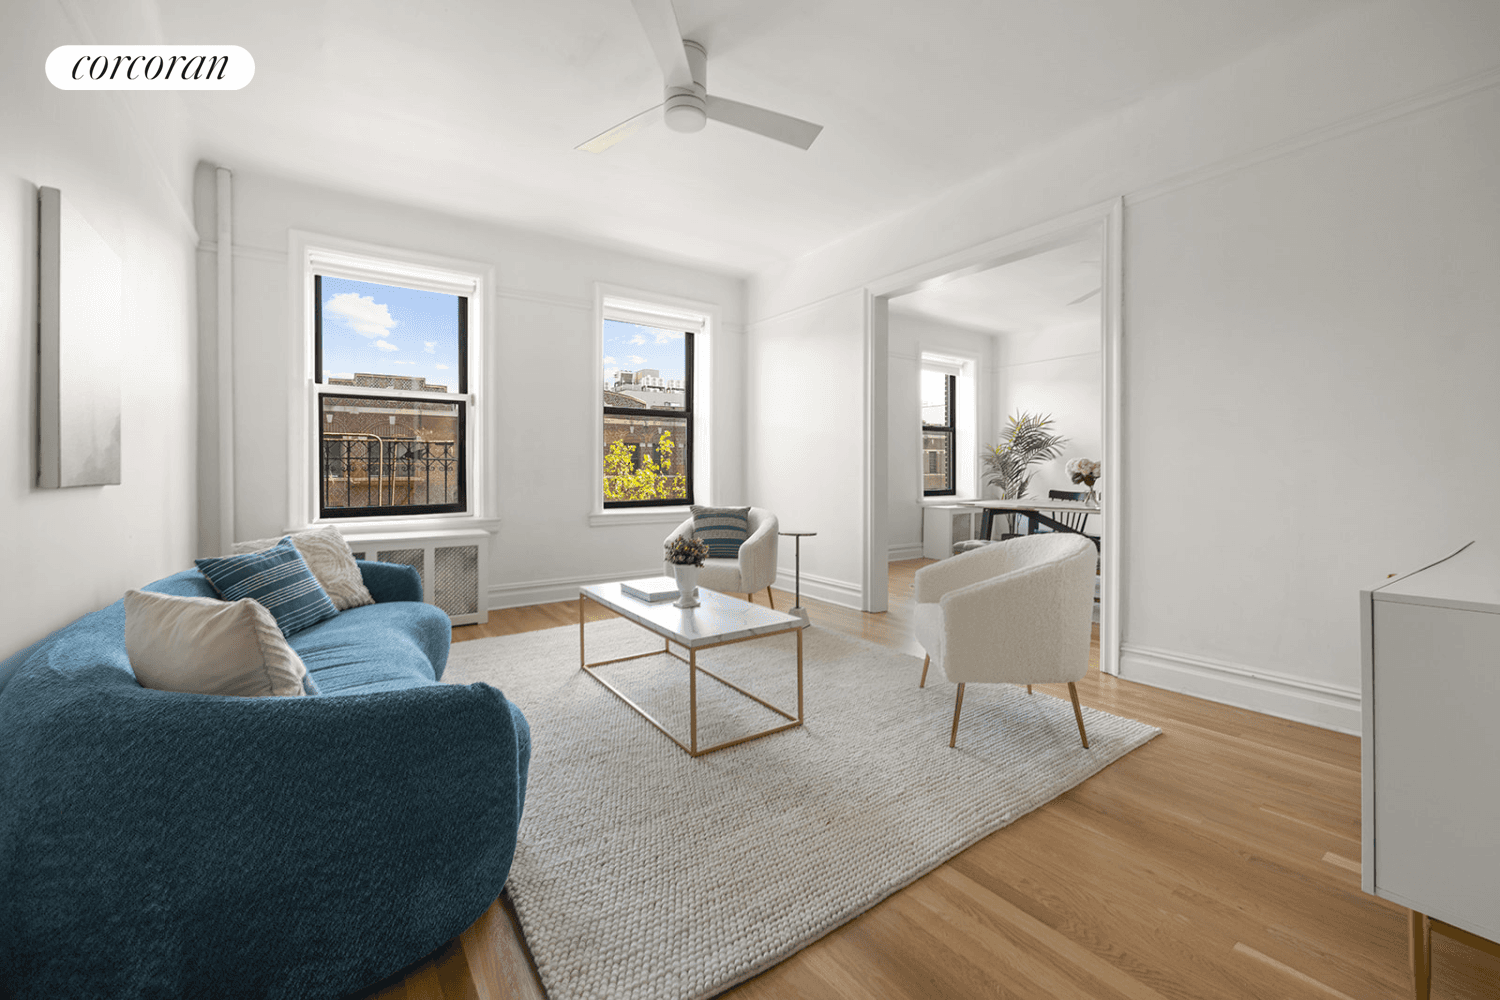 Bright and airy, this lovely home is currently used as a 2 bedrooms plus dining room and can easily be converted to 3 large bedrooms see alternate floorplan.